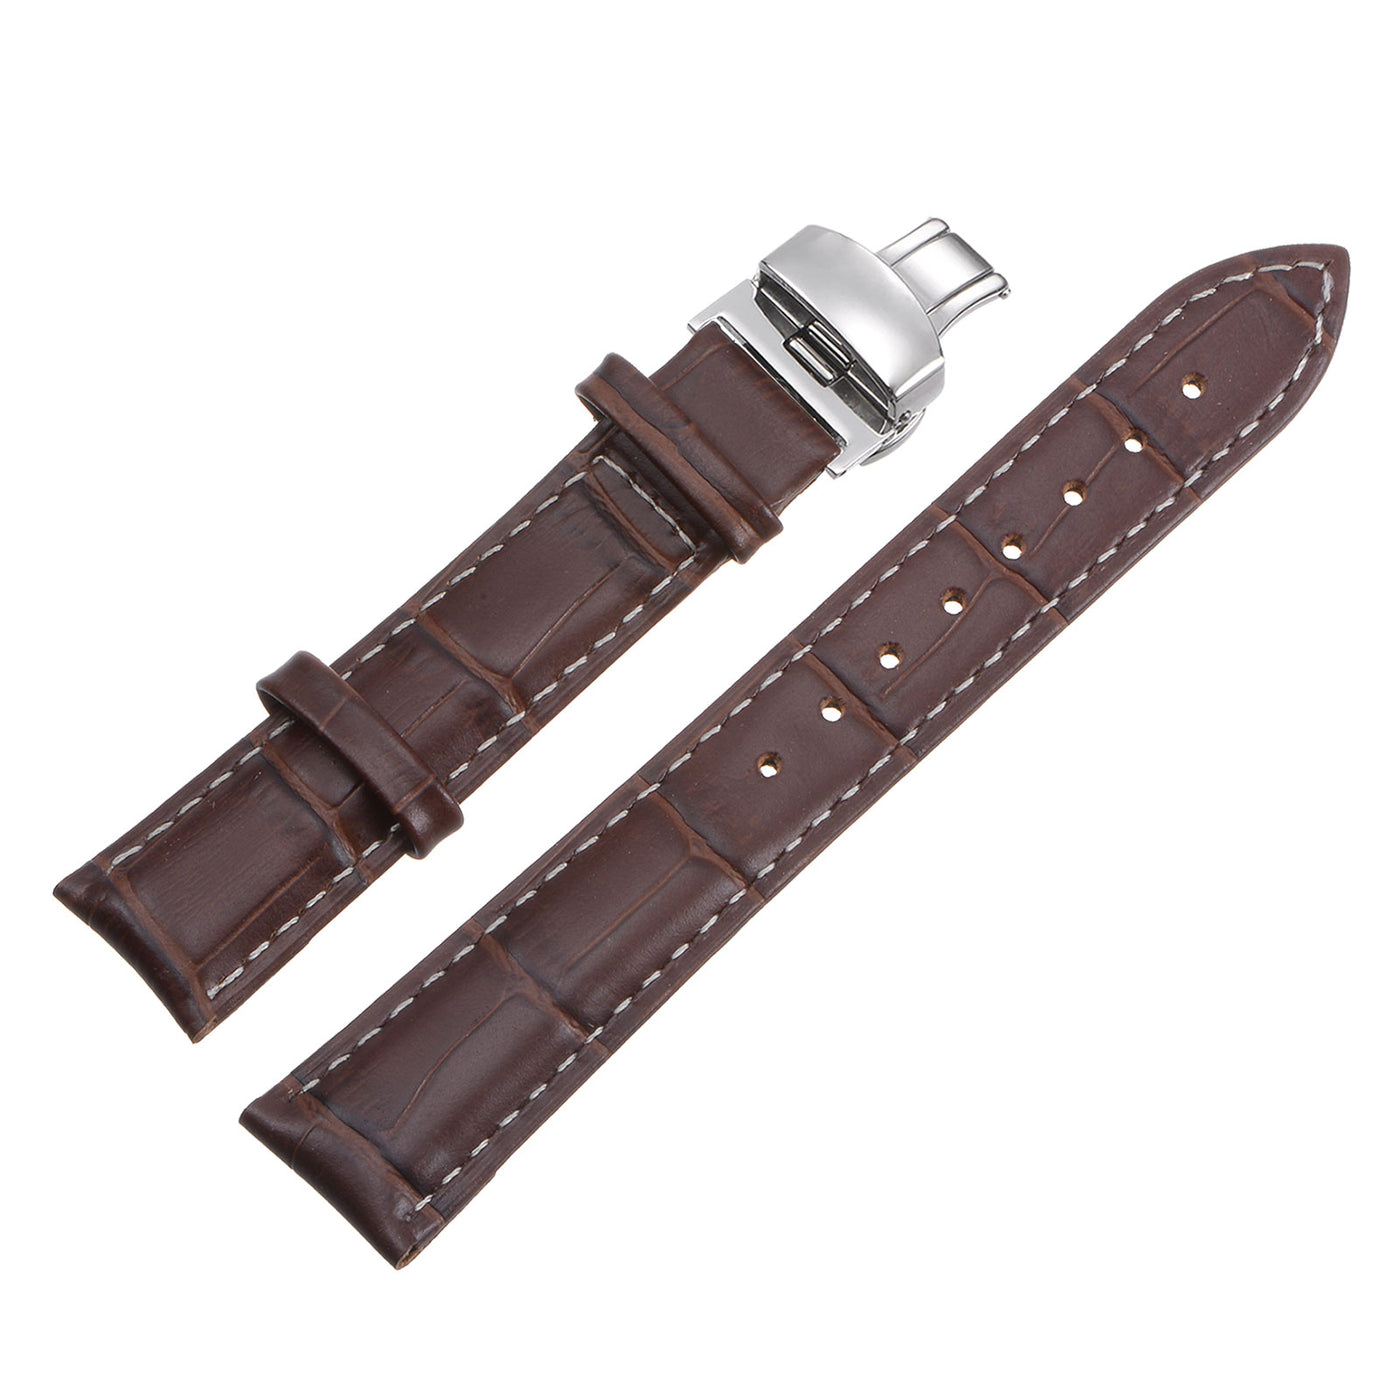 uxcell Uxcell Leather Band Deployment Buckle Watch Strap 16mm with Spring Bars, Light Brown